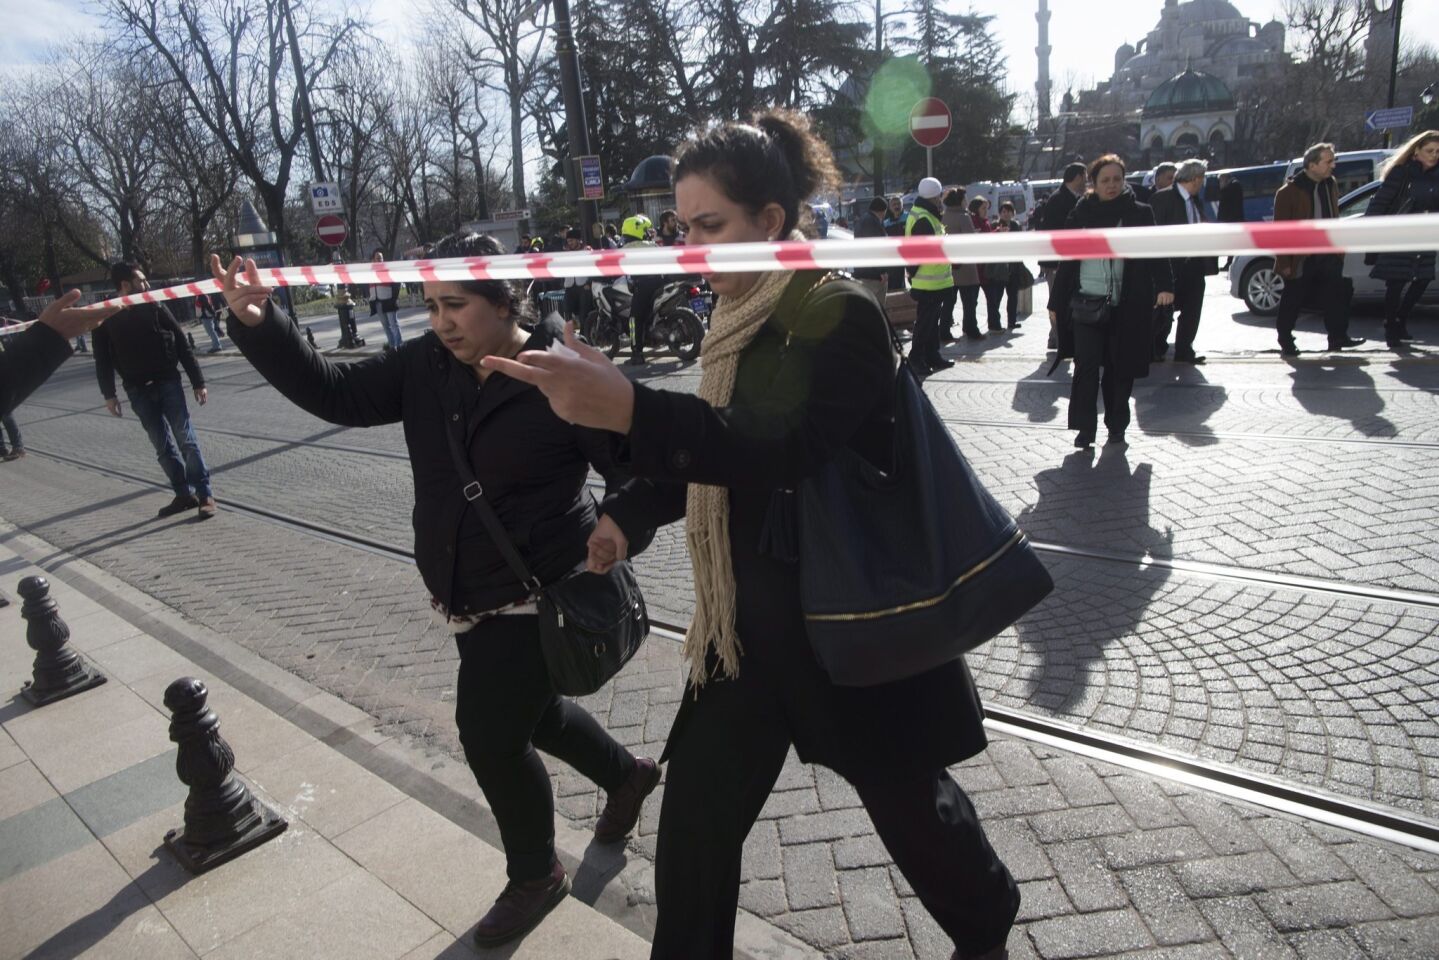 People get away from the area after an explosion near the Blue Mosque in the Sultanahmet district of central Istanbul.